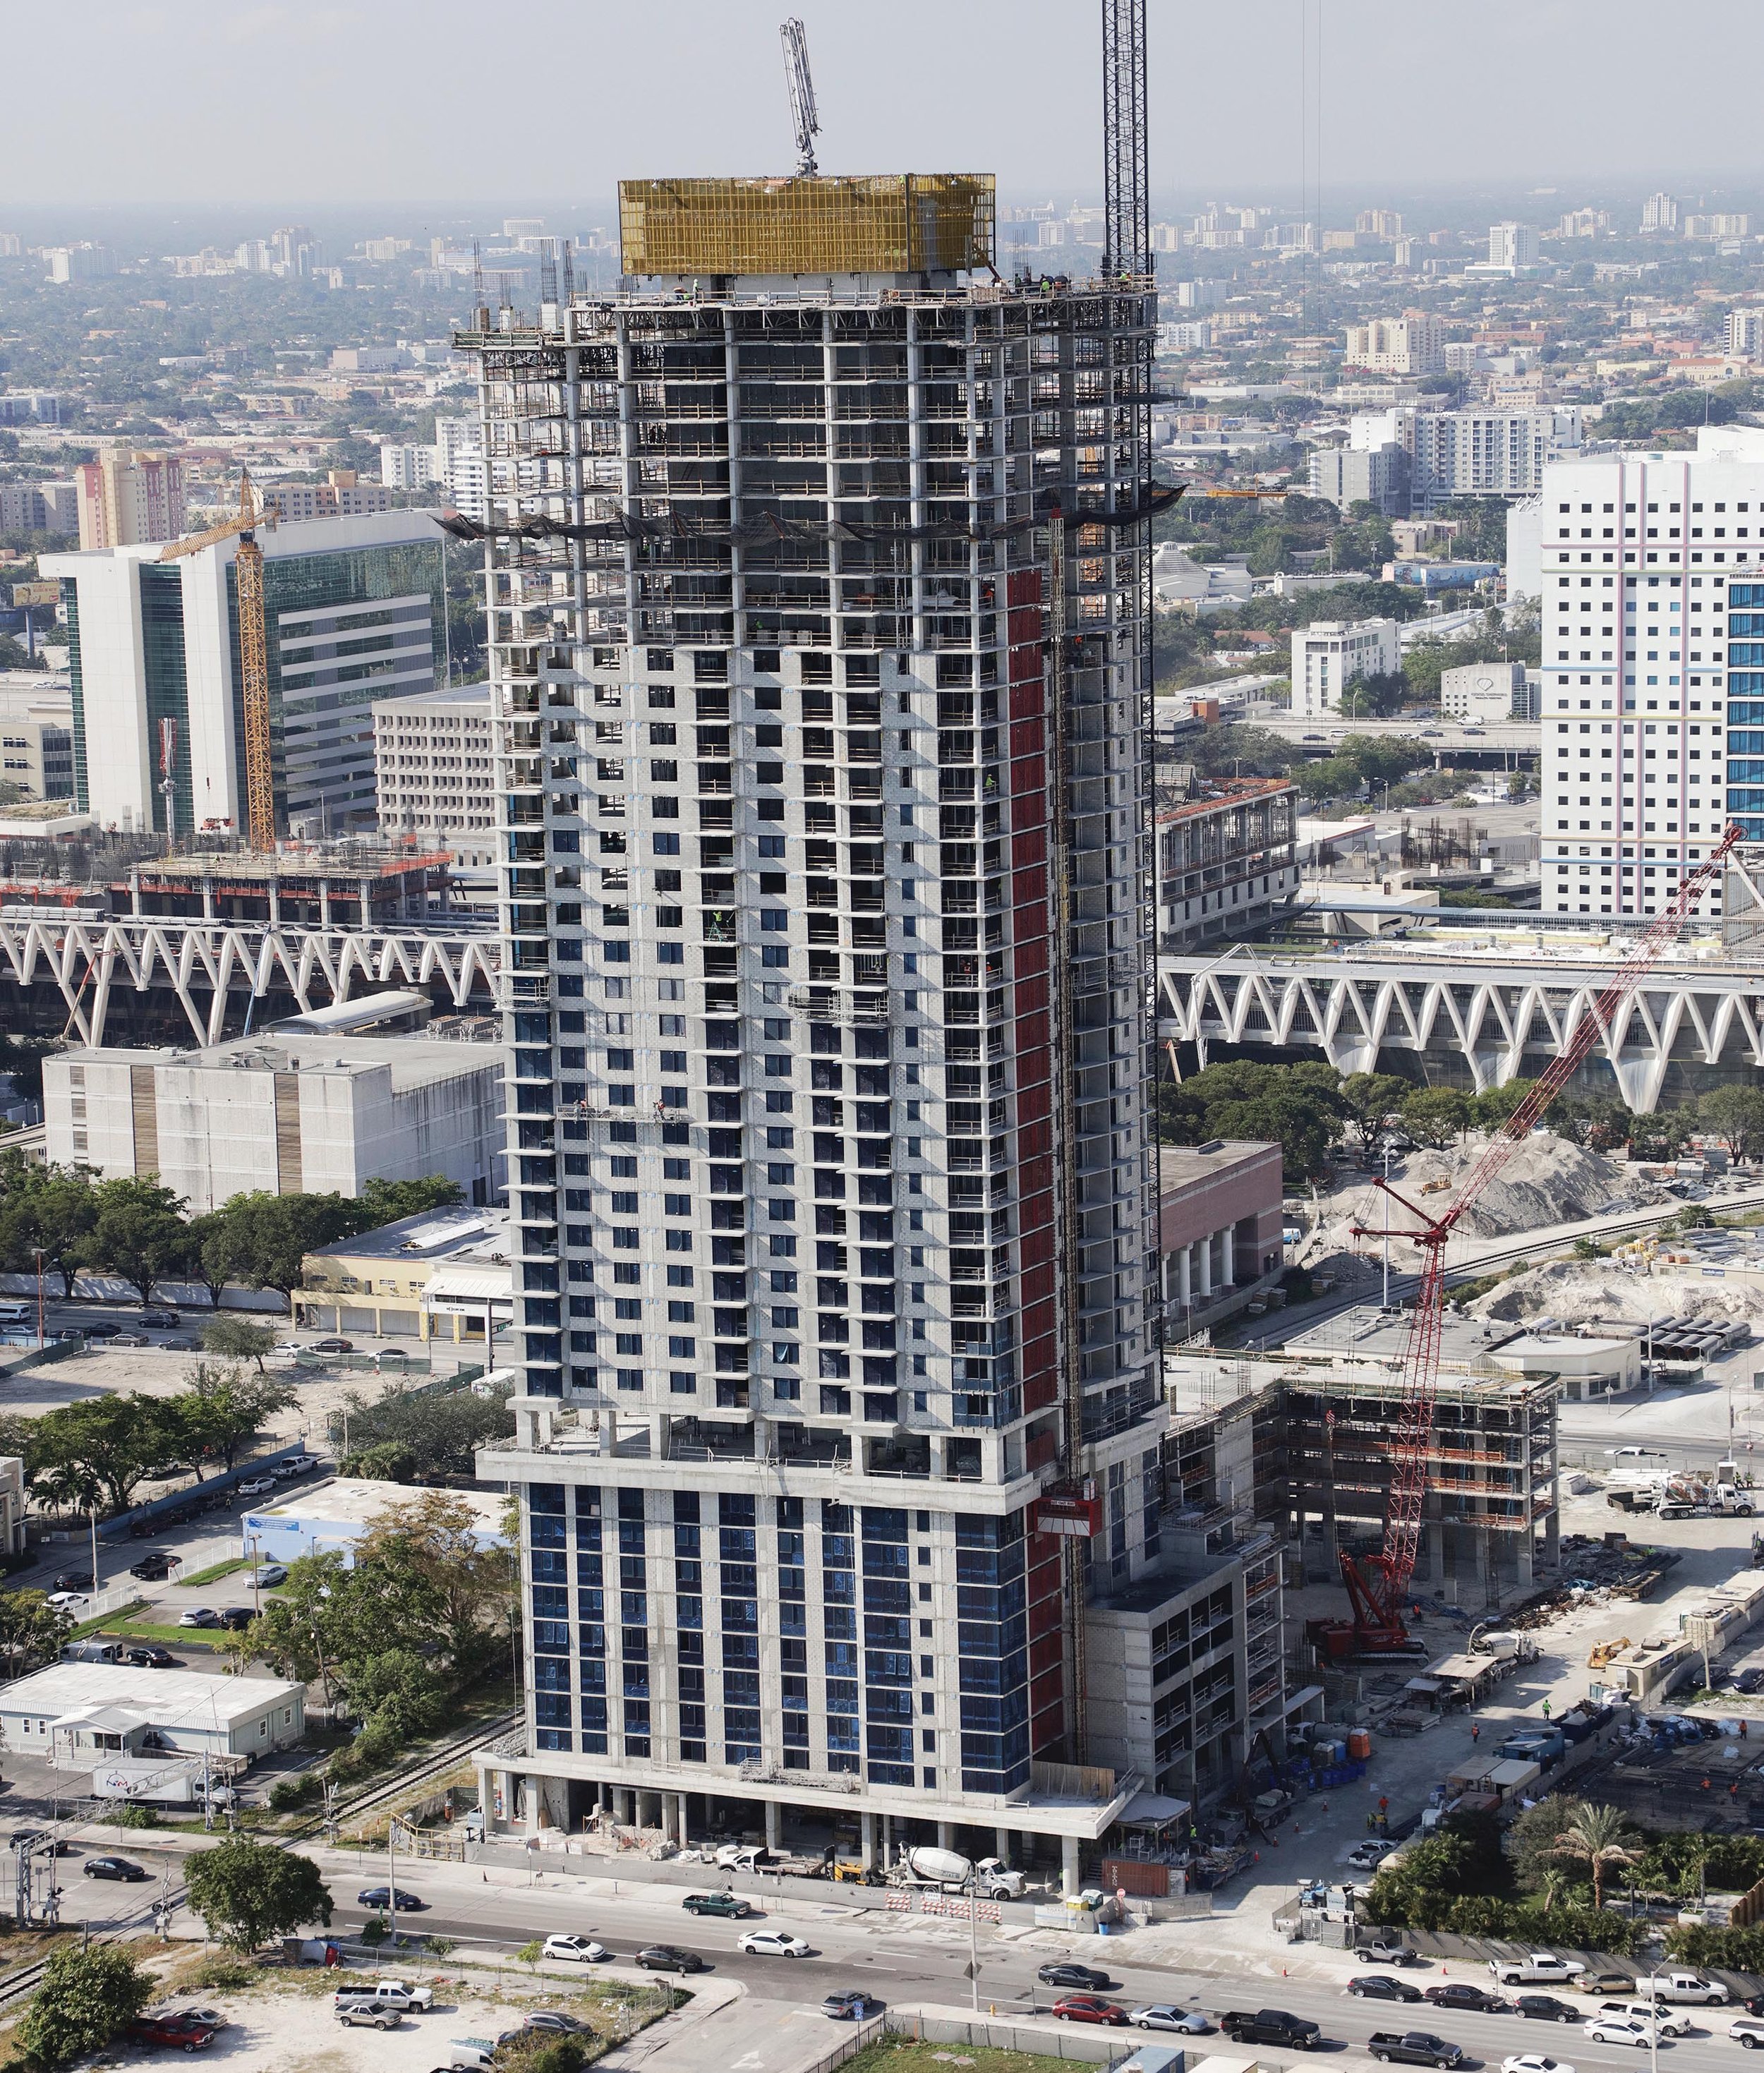 Caoba is the first tower to open at Miami Worldcenter